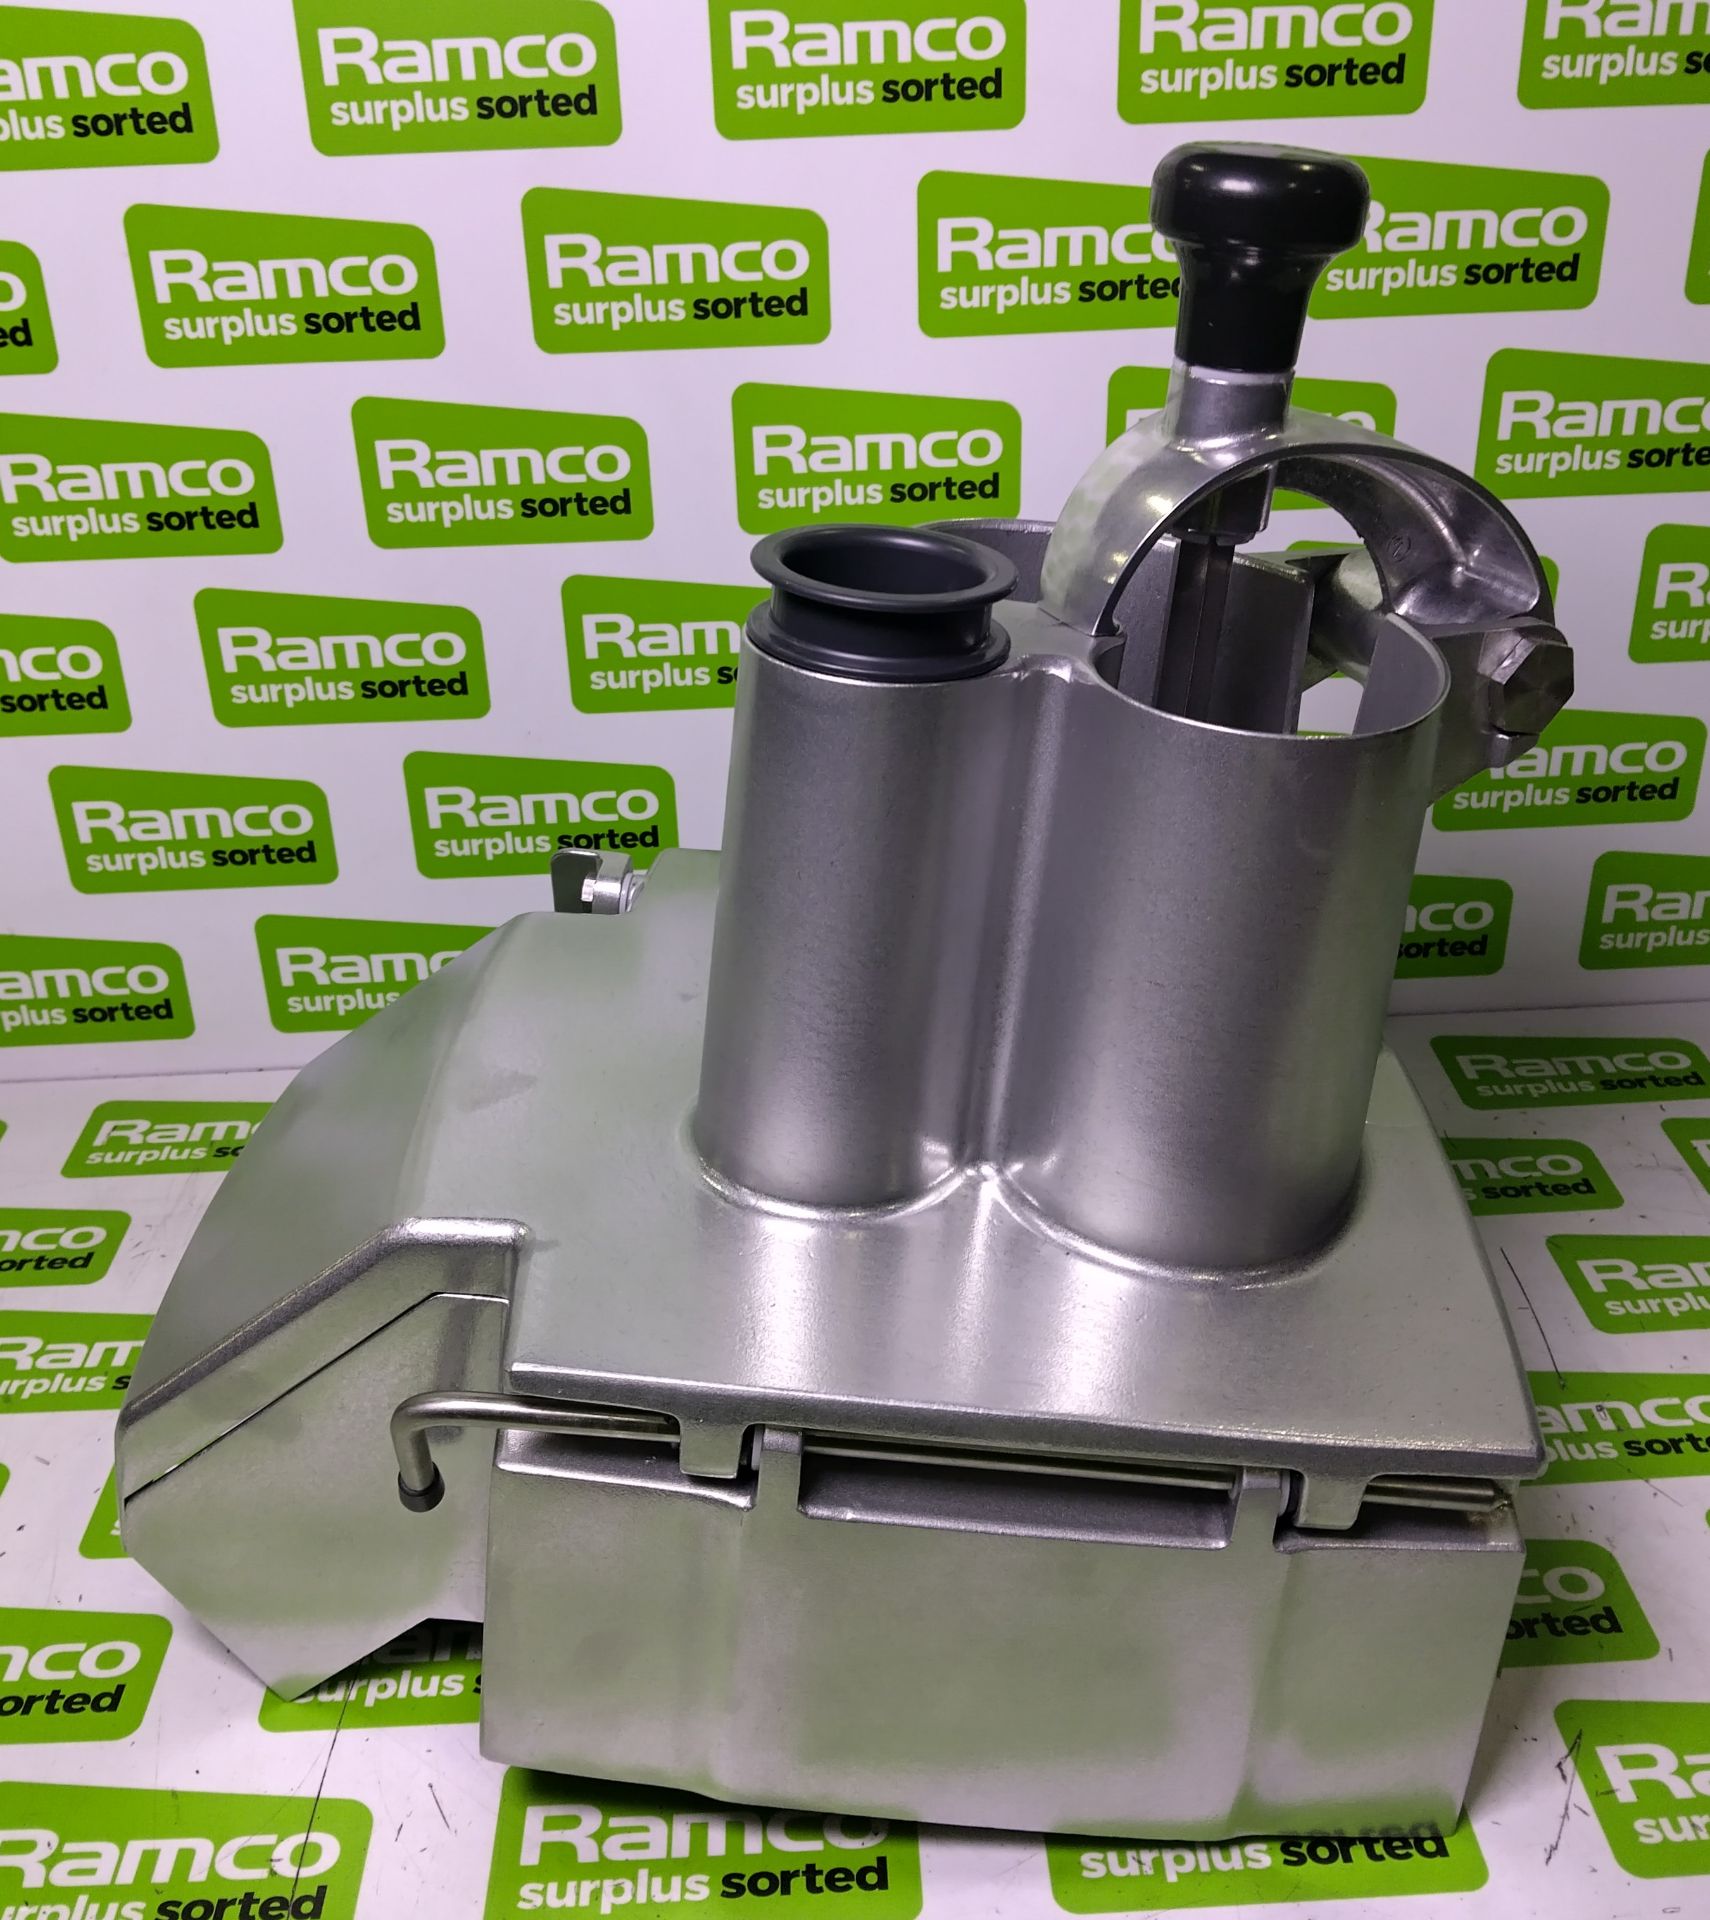 Robot-Coupe R 502 - food processor with stainless steel cutter bowl and slicing attachment - 440V - Image 5 of 6